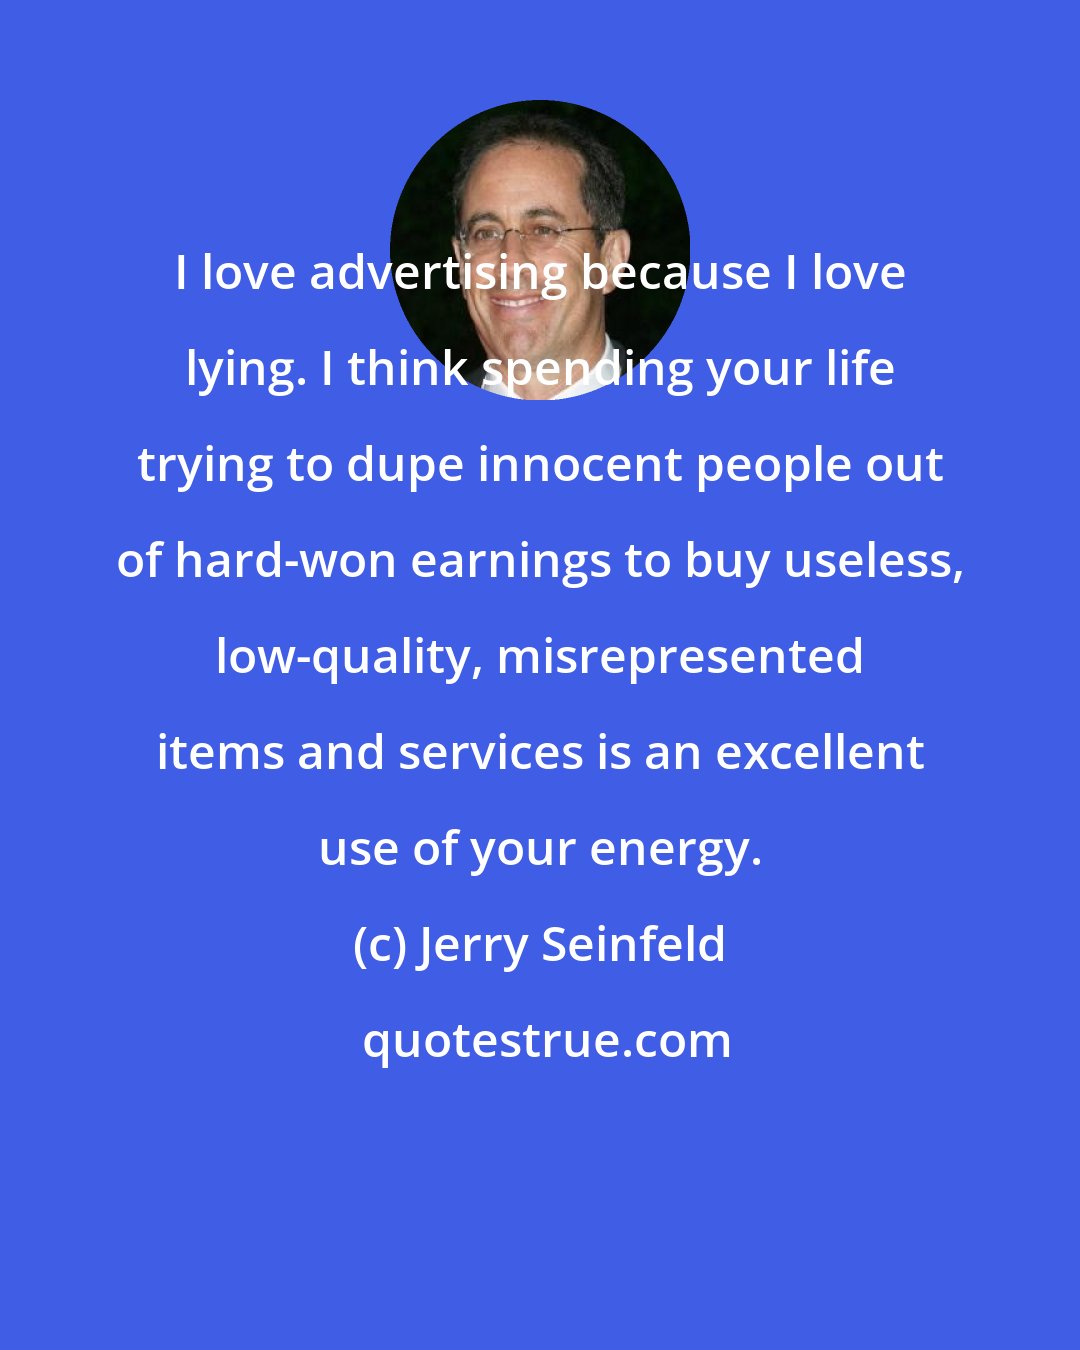 Jerry Seinfeld: I love advertising because I love lying. I think spending your life trying to dupe innocent people out of hard-won earnings to buy useless, low-quality, misrepresented items and services is an excellent use of your energy.